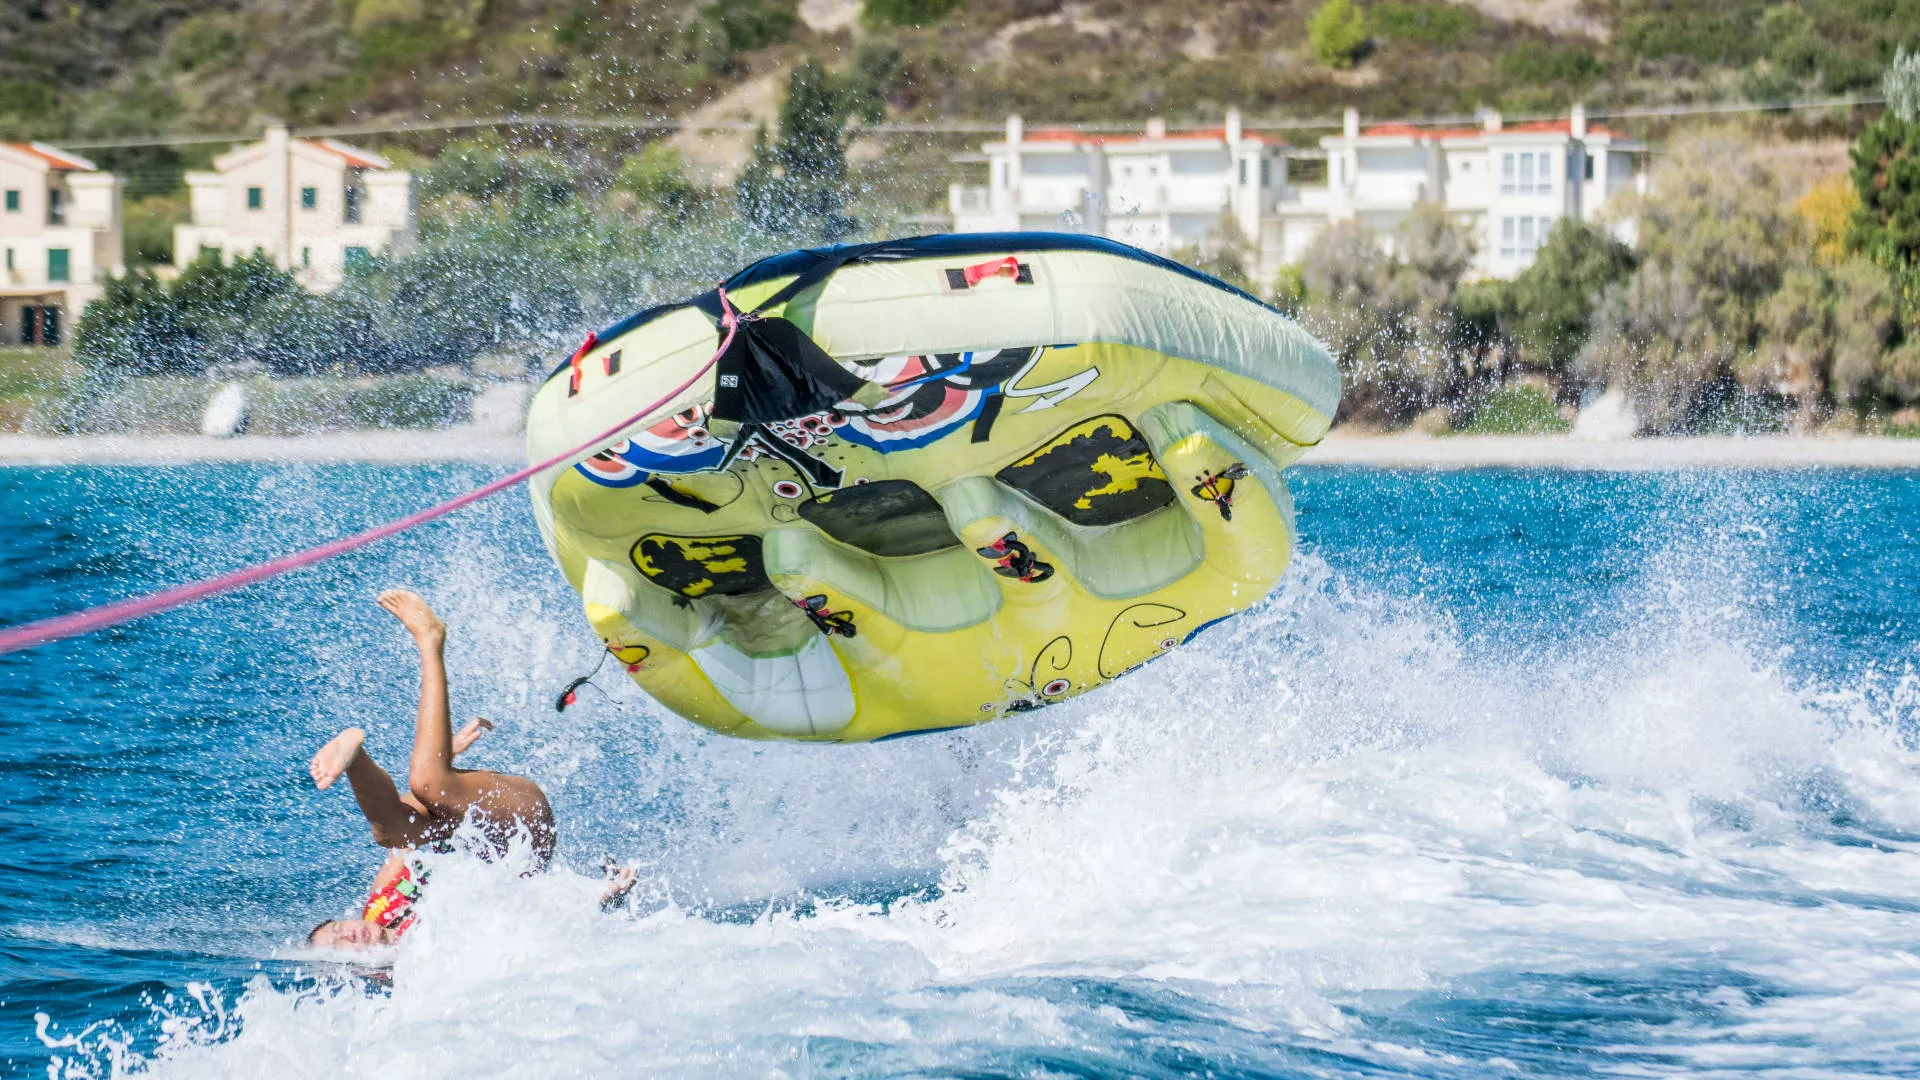 Mike's Water Sports Kolymbia in Greece, Europe | Parasailing,Jet Skiing - Rated 1